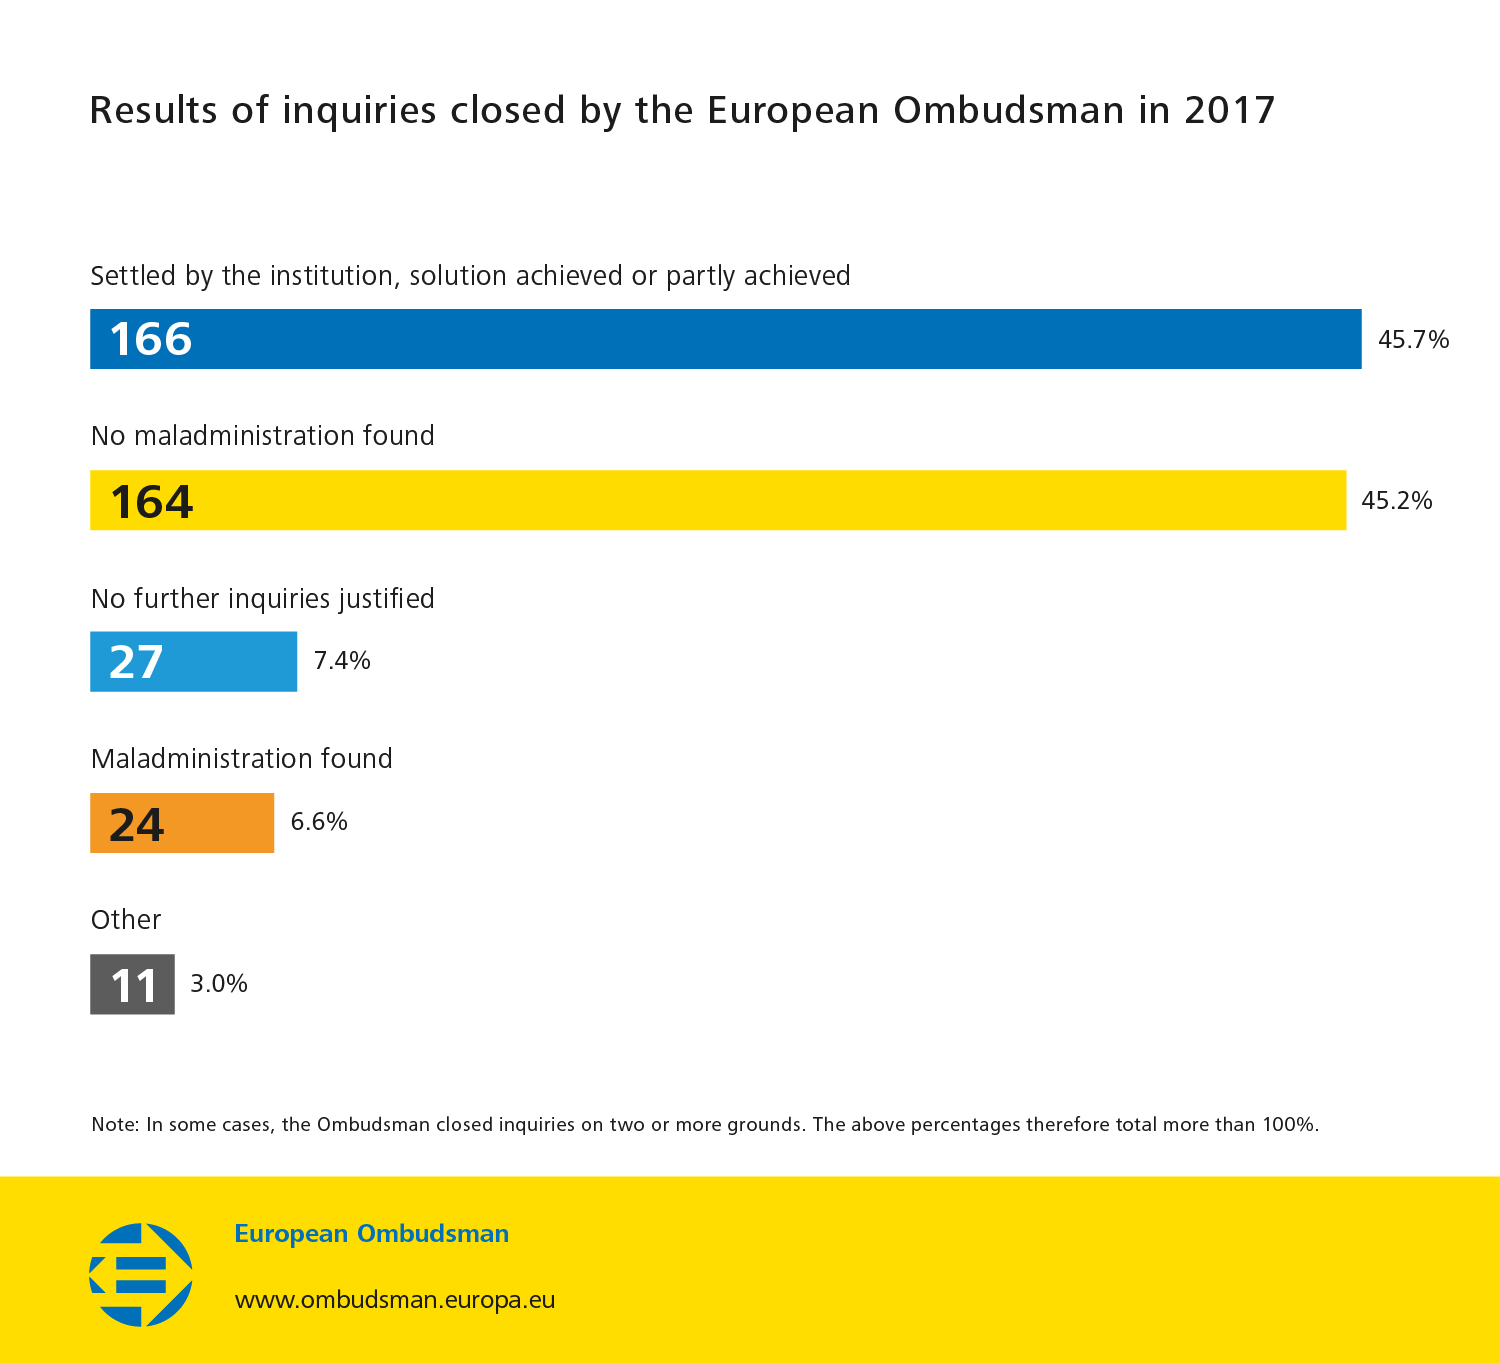 Results of inquiries closed by the European Ombudsman in 2017